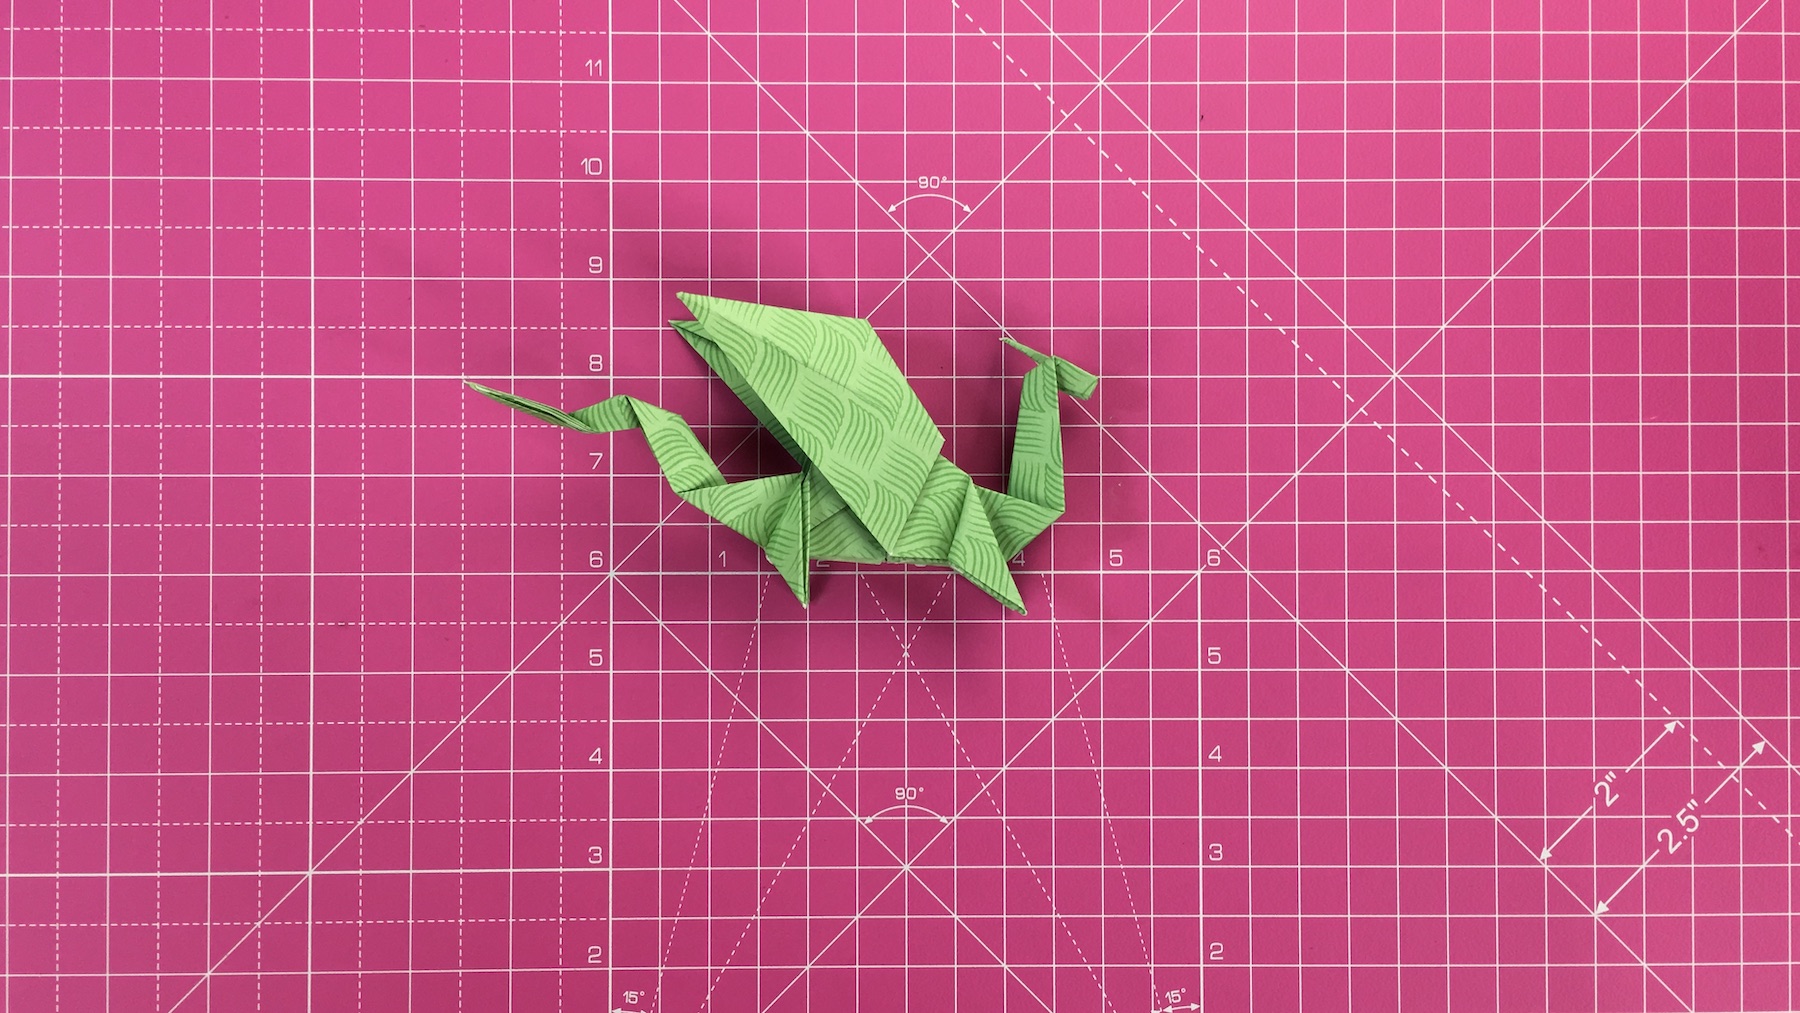 How to make an origami dragon, origami dragon tutorial - step 55a